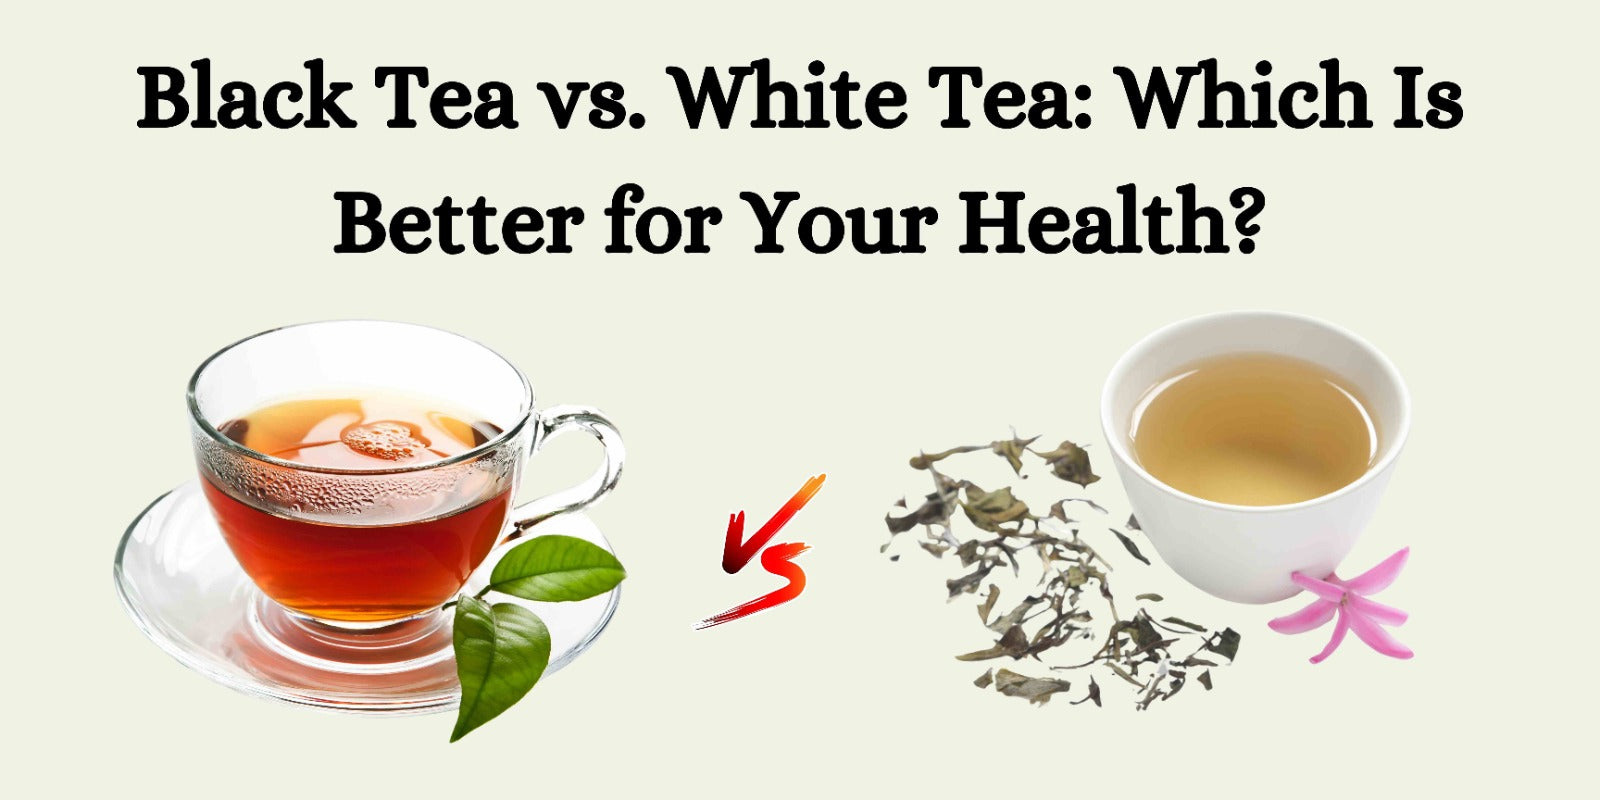 Black Tea vs. White Tea: Which Works Better for Your Health?